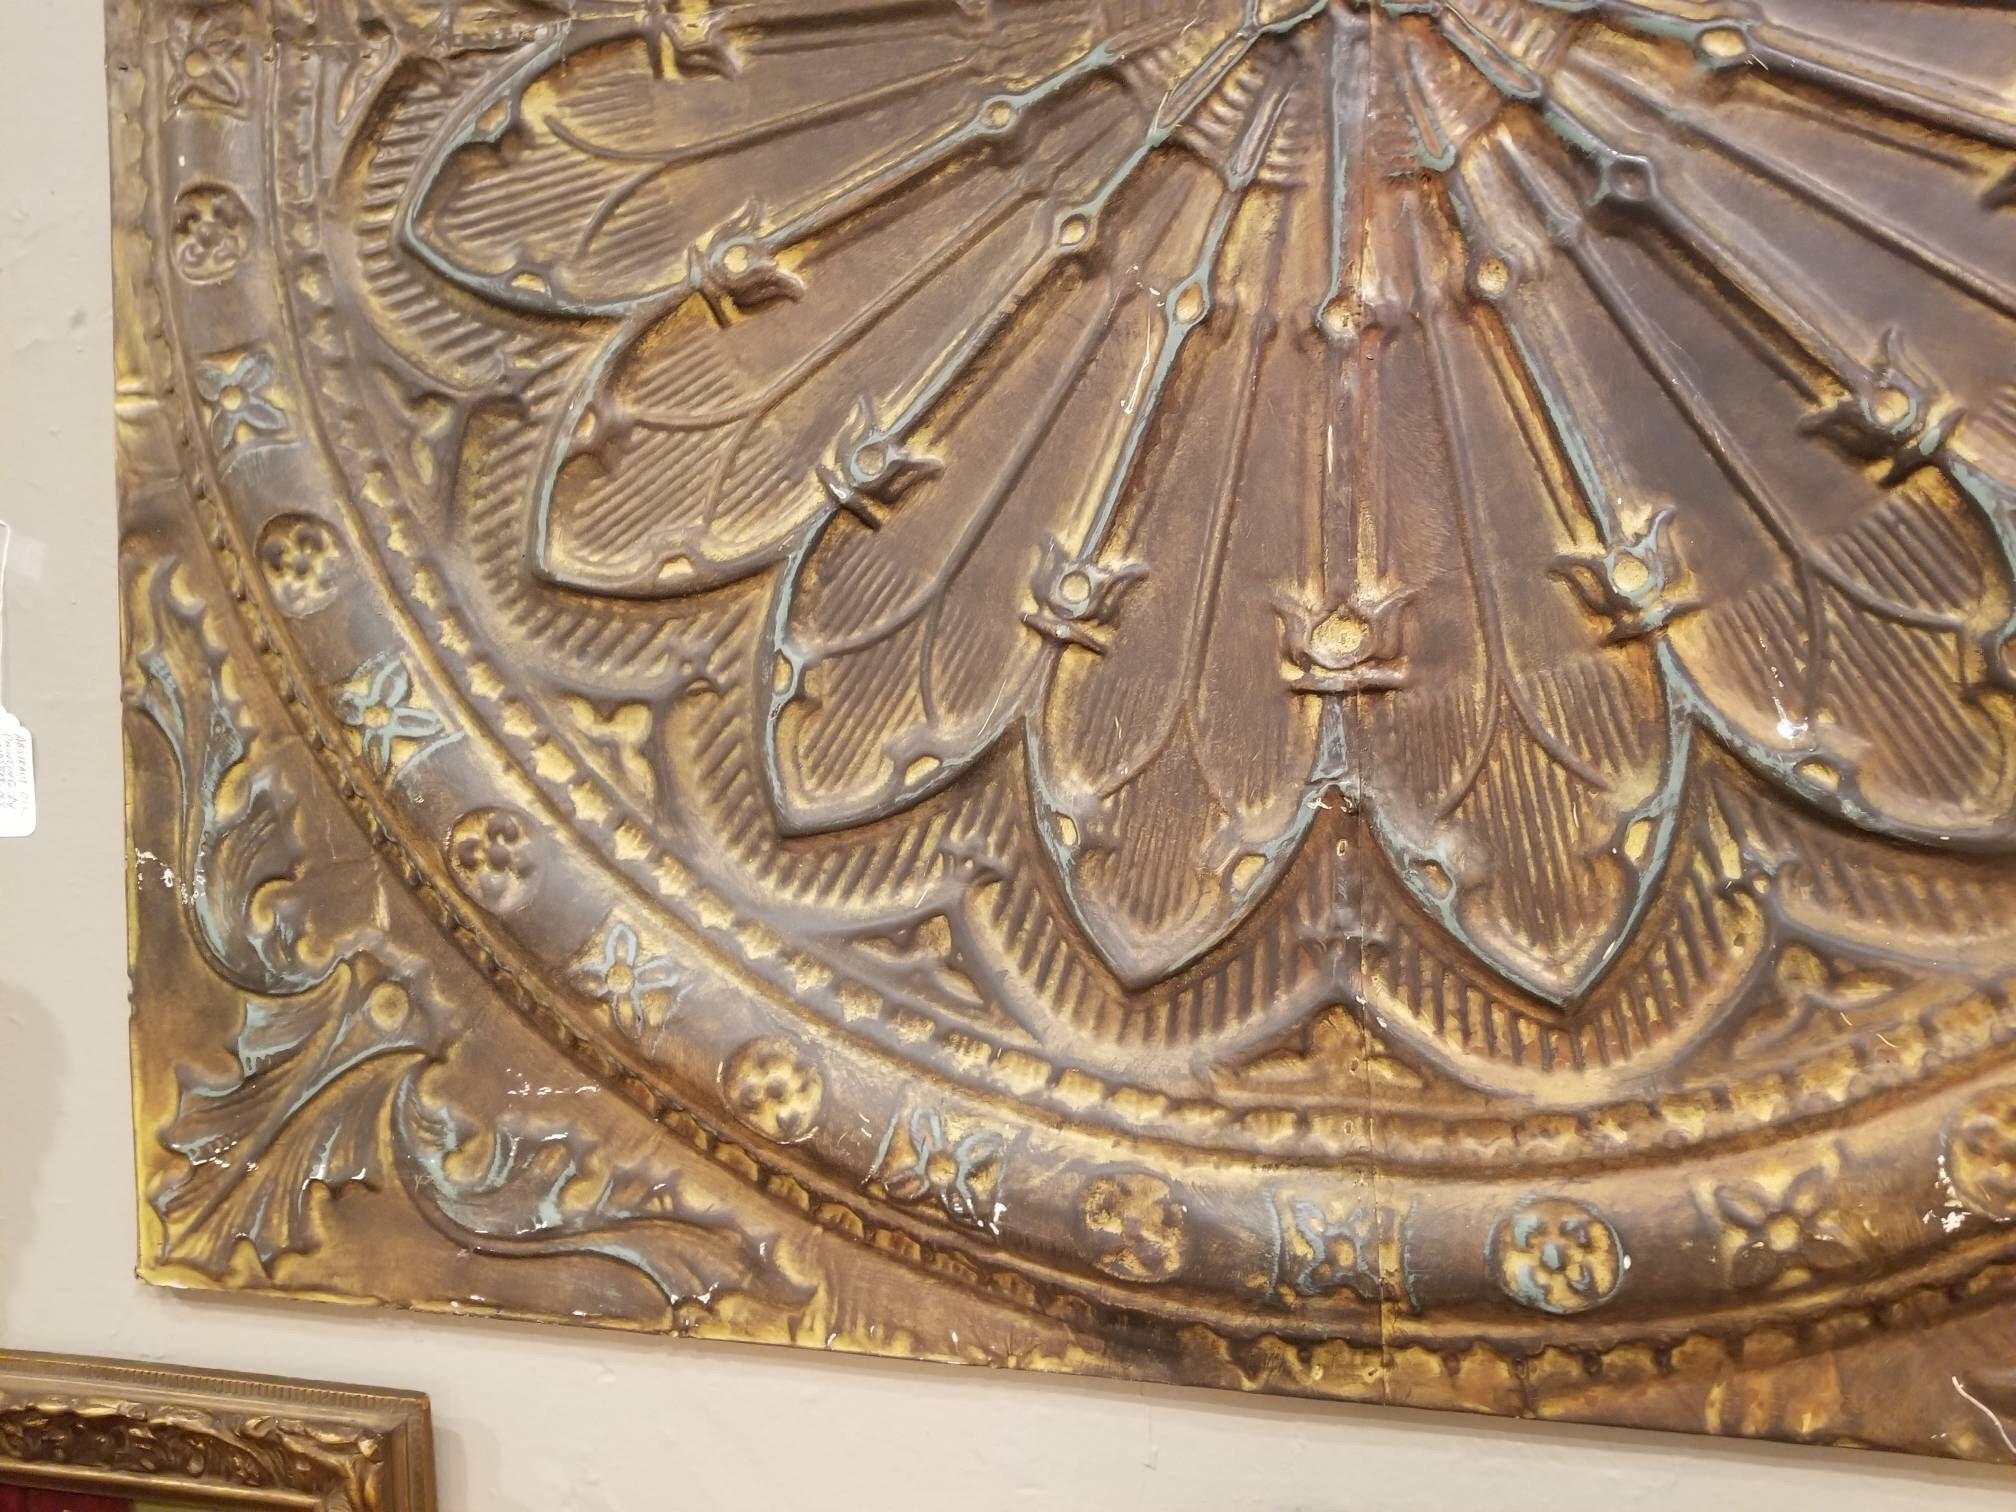 19th Century Monumental Architectural Ceiling Tile, Provenance a Philly Library, circa 1890